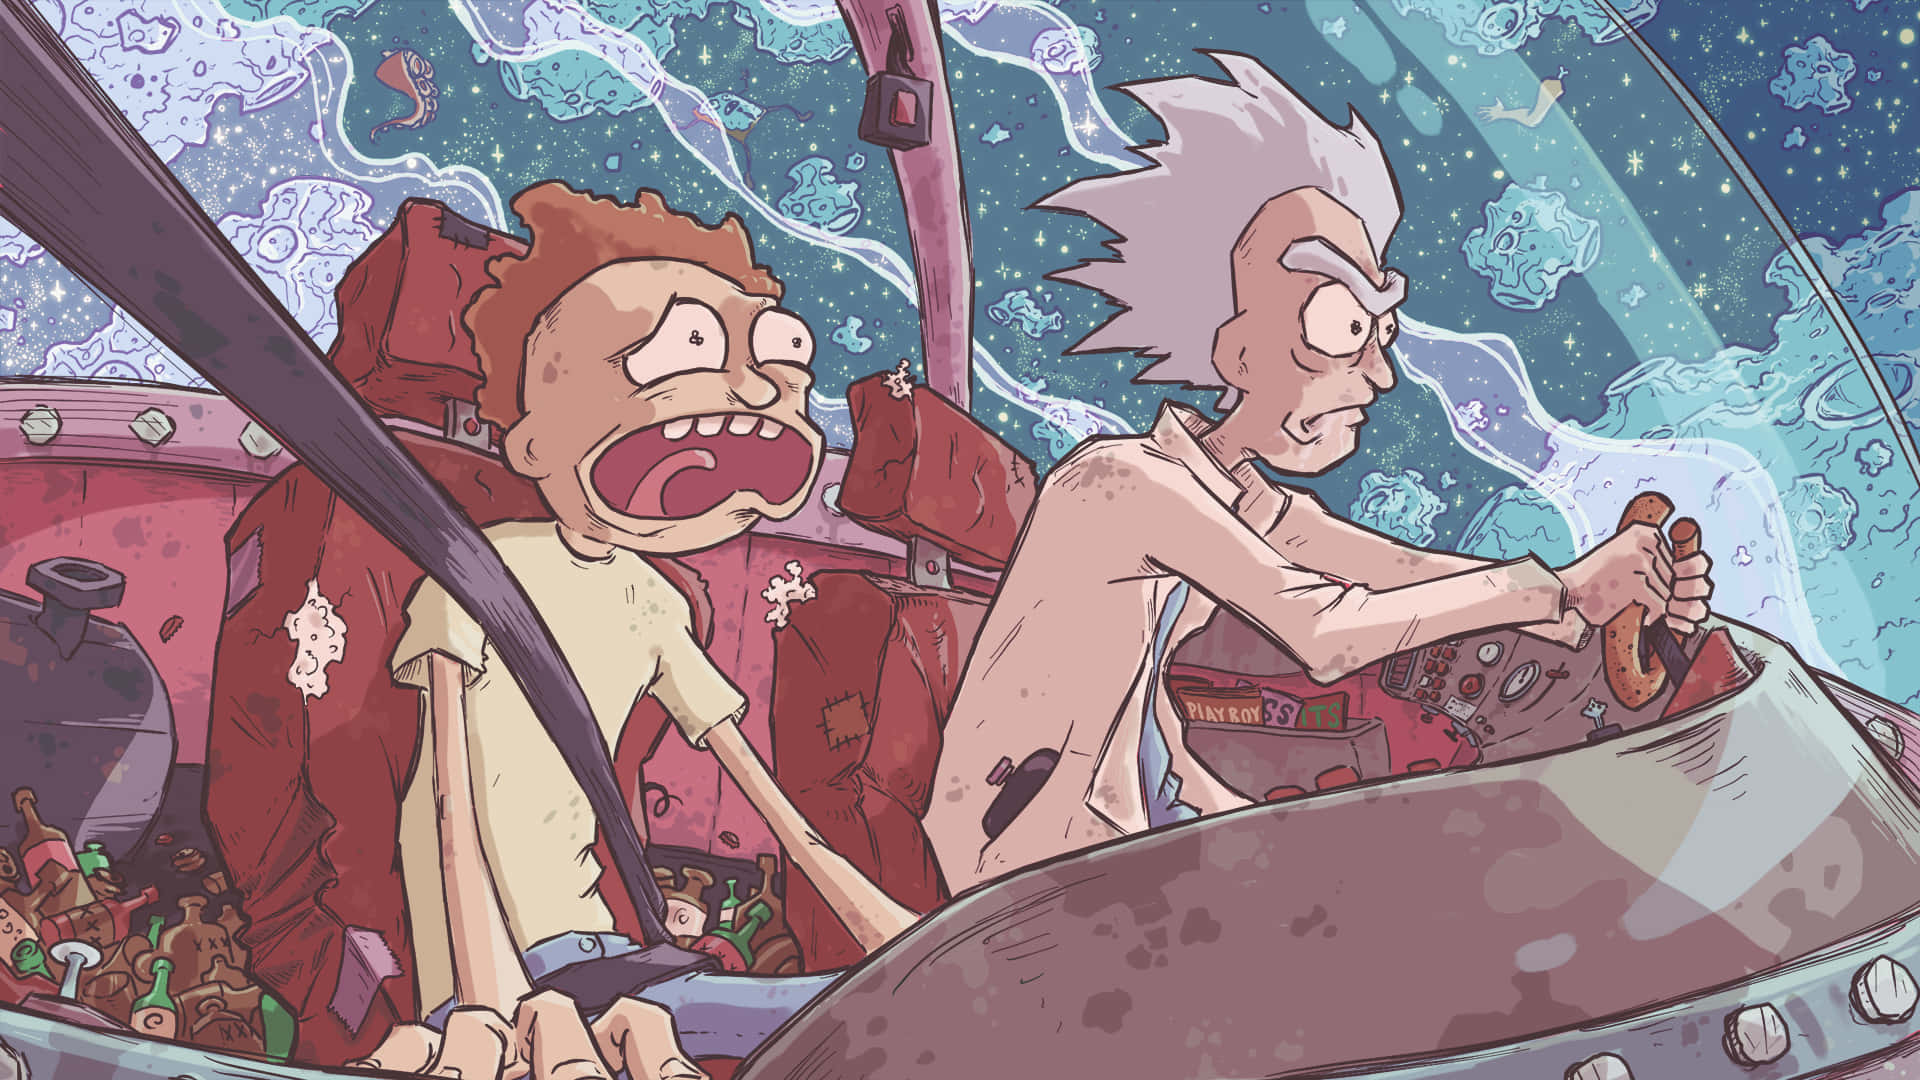 Get your hands on the official Rick and Morty Laptop! Wallpaper